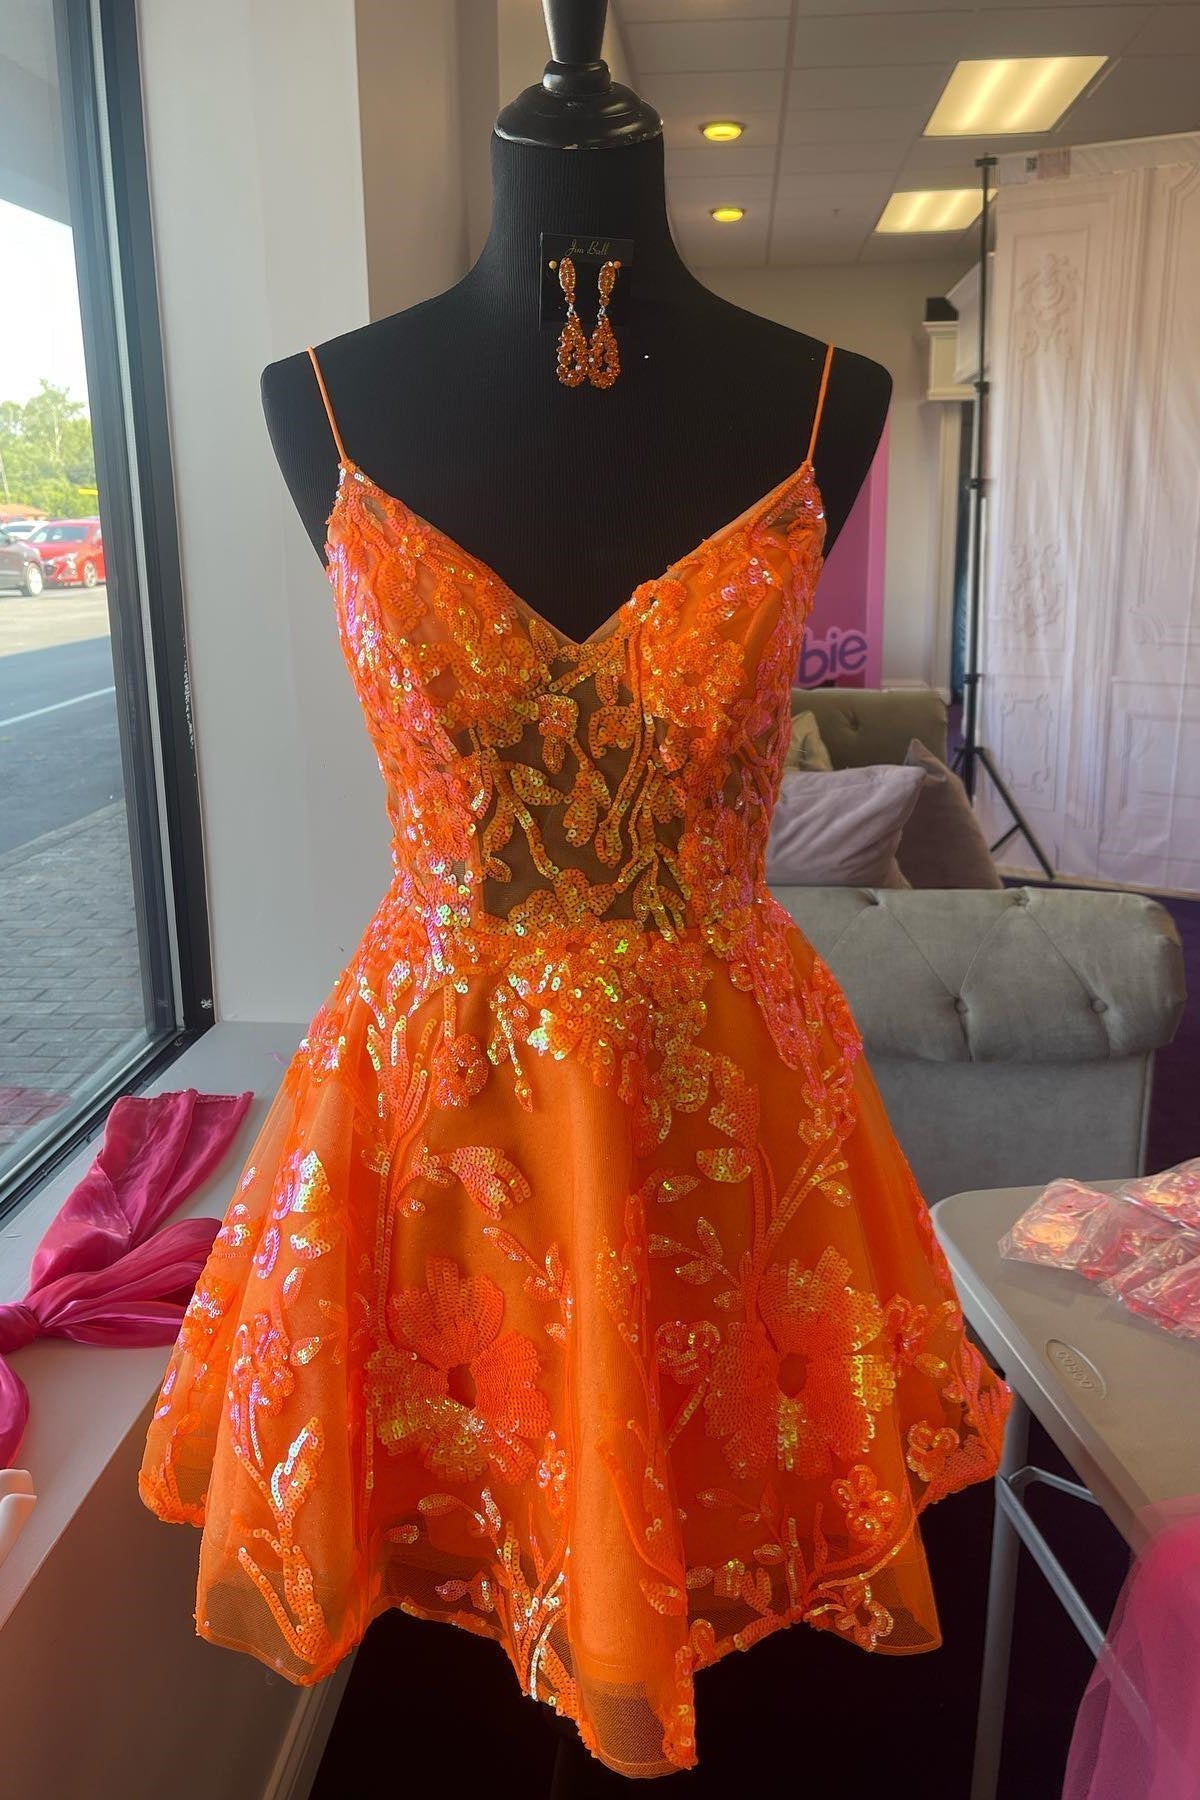 Orange A-line V Neck Straps Sequins-Embroidered Corset Homecoming Dress outfit, Prom Dress Chiffon